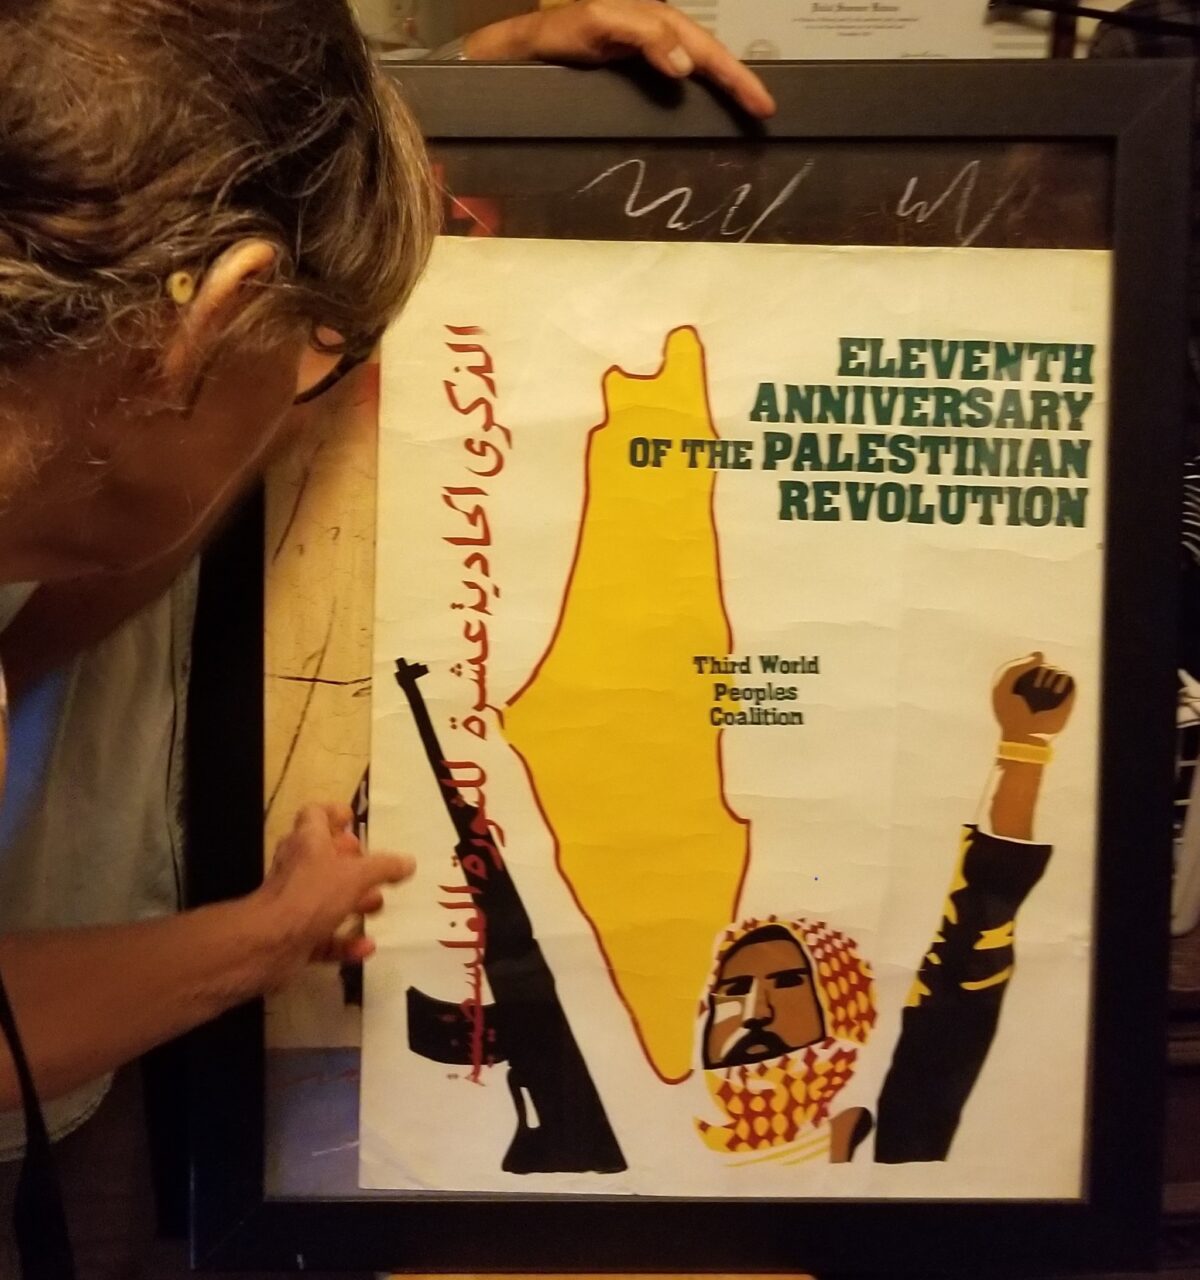 Native Study Group on Indigenous and Palestinian Struggles